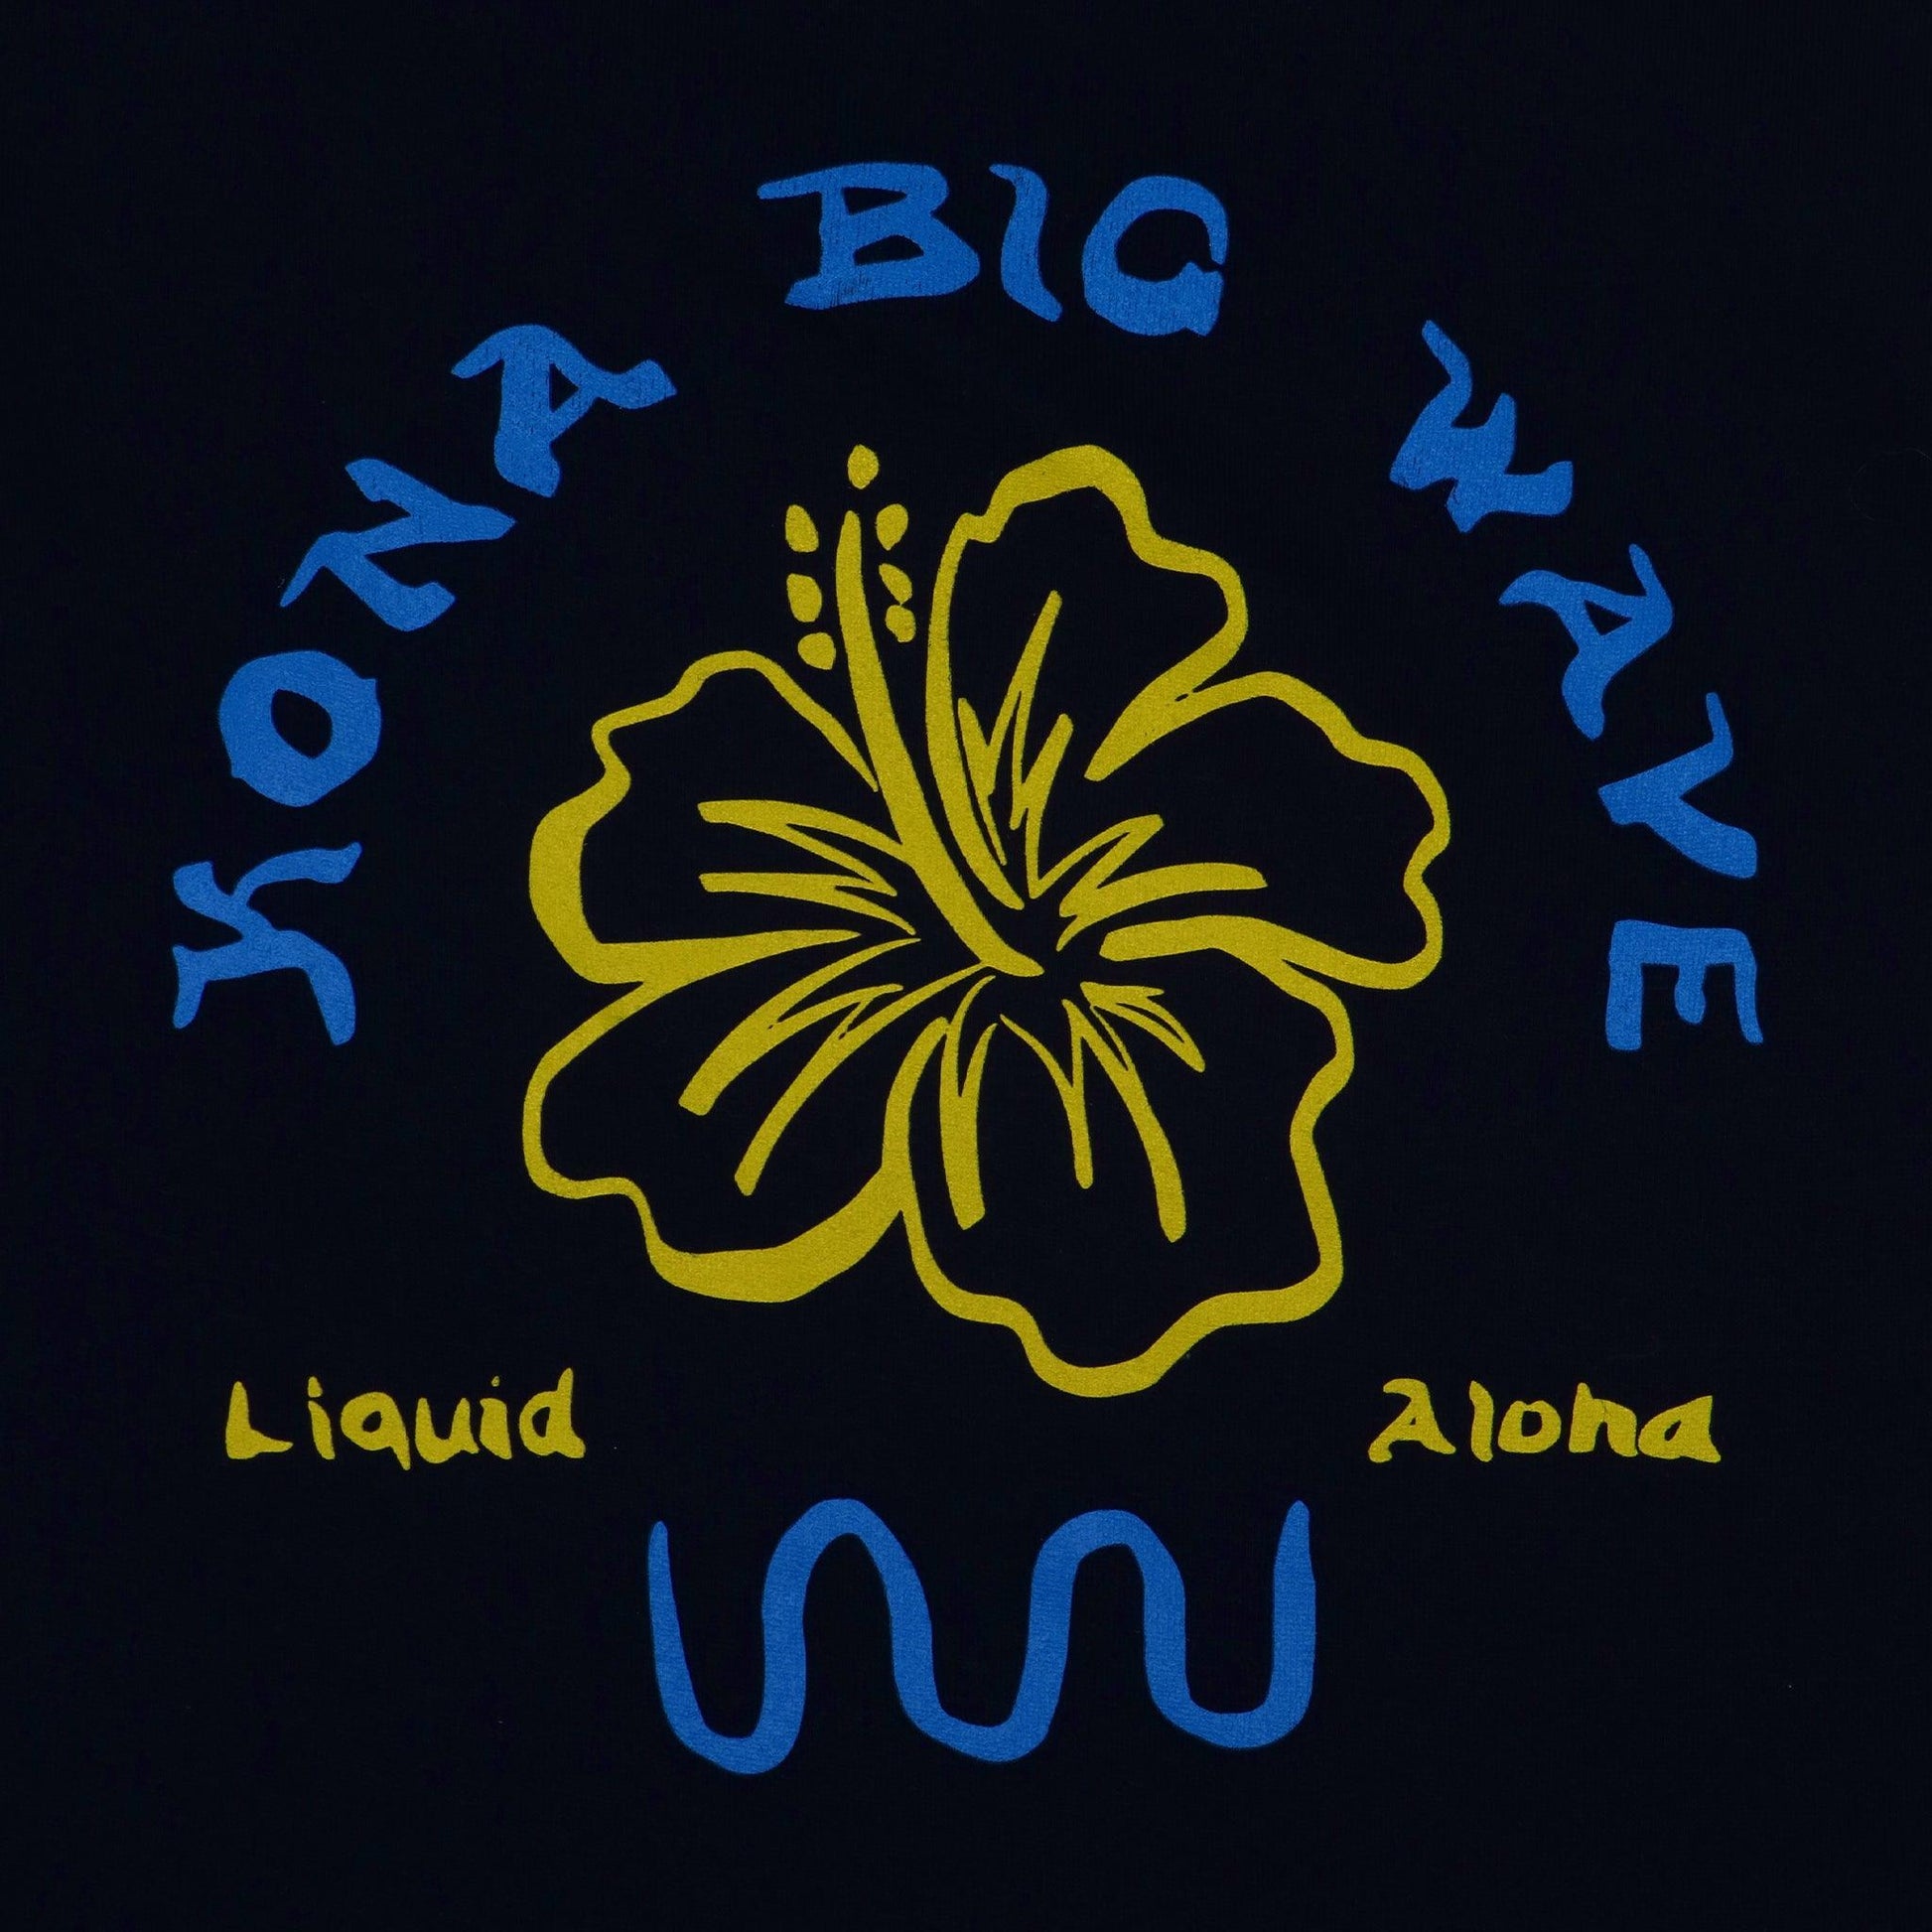 close up of the decoration on the back features large yellow hibiscus flower  and says Kona big wave liquid aloha